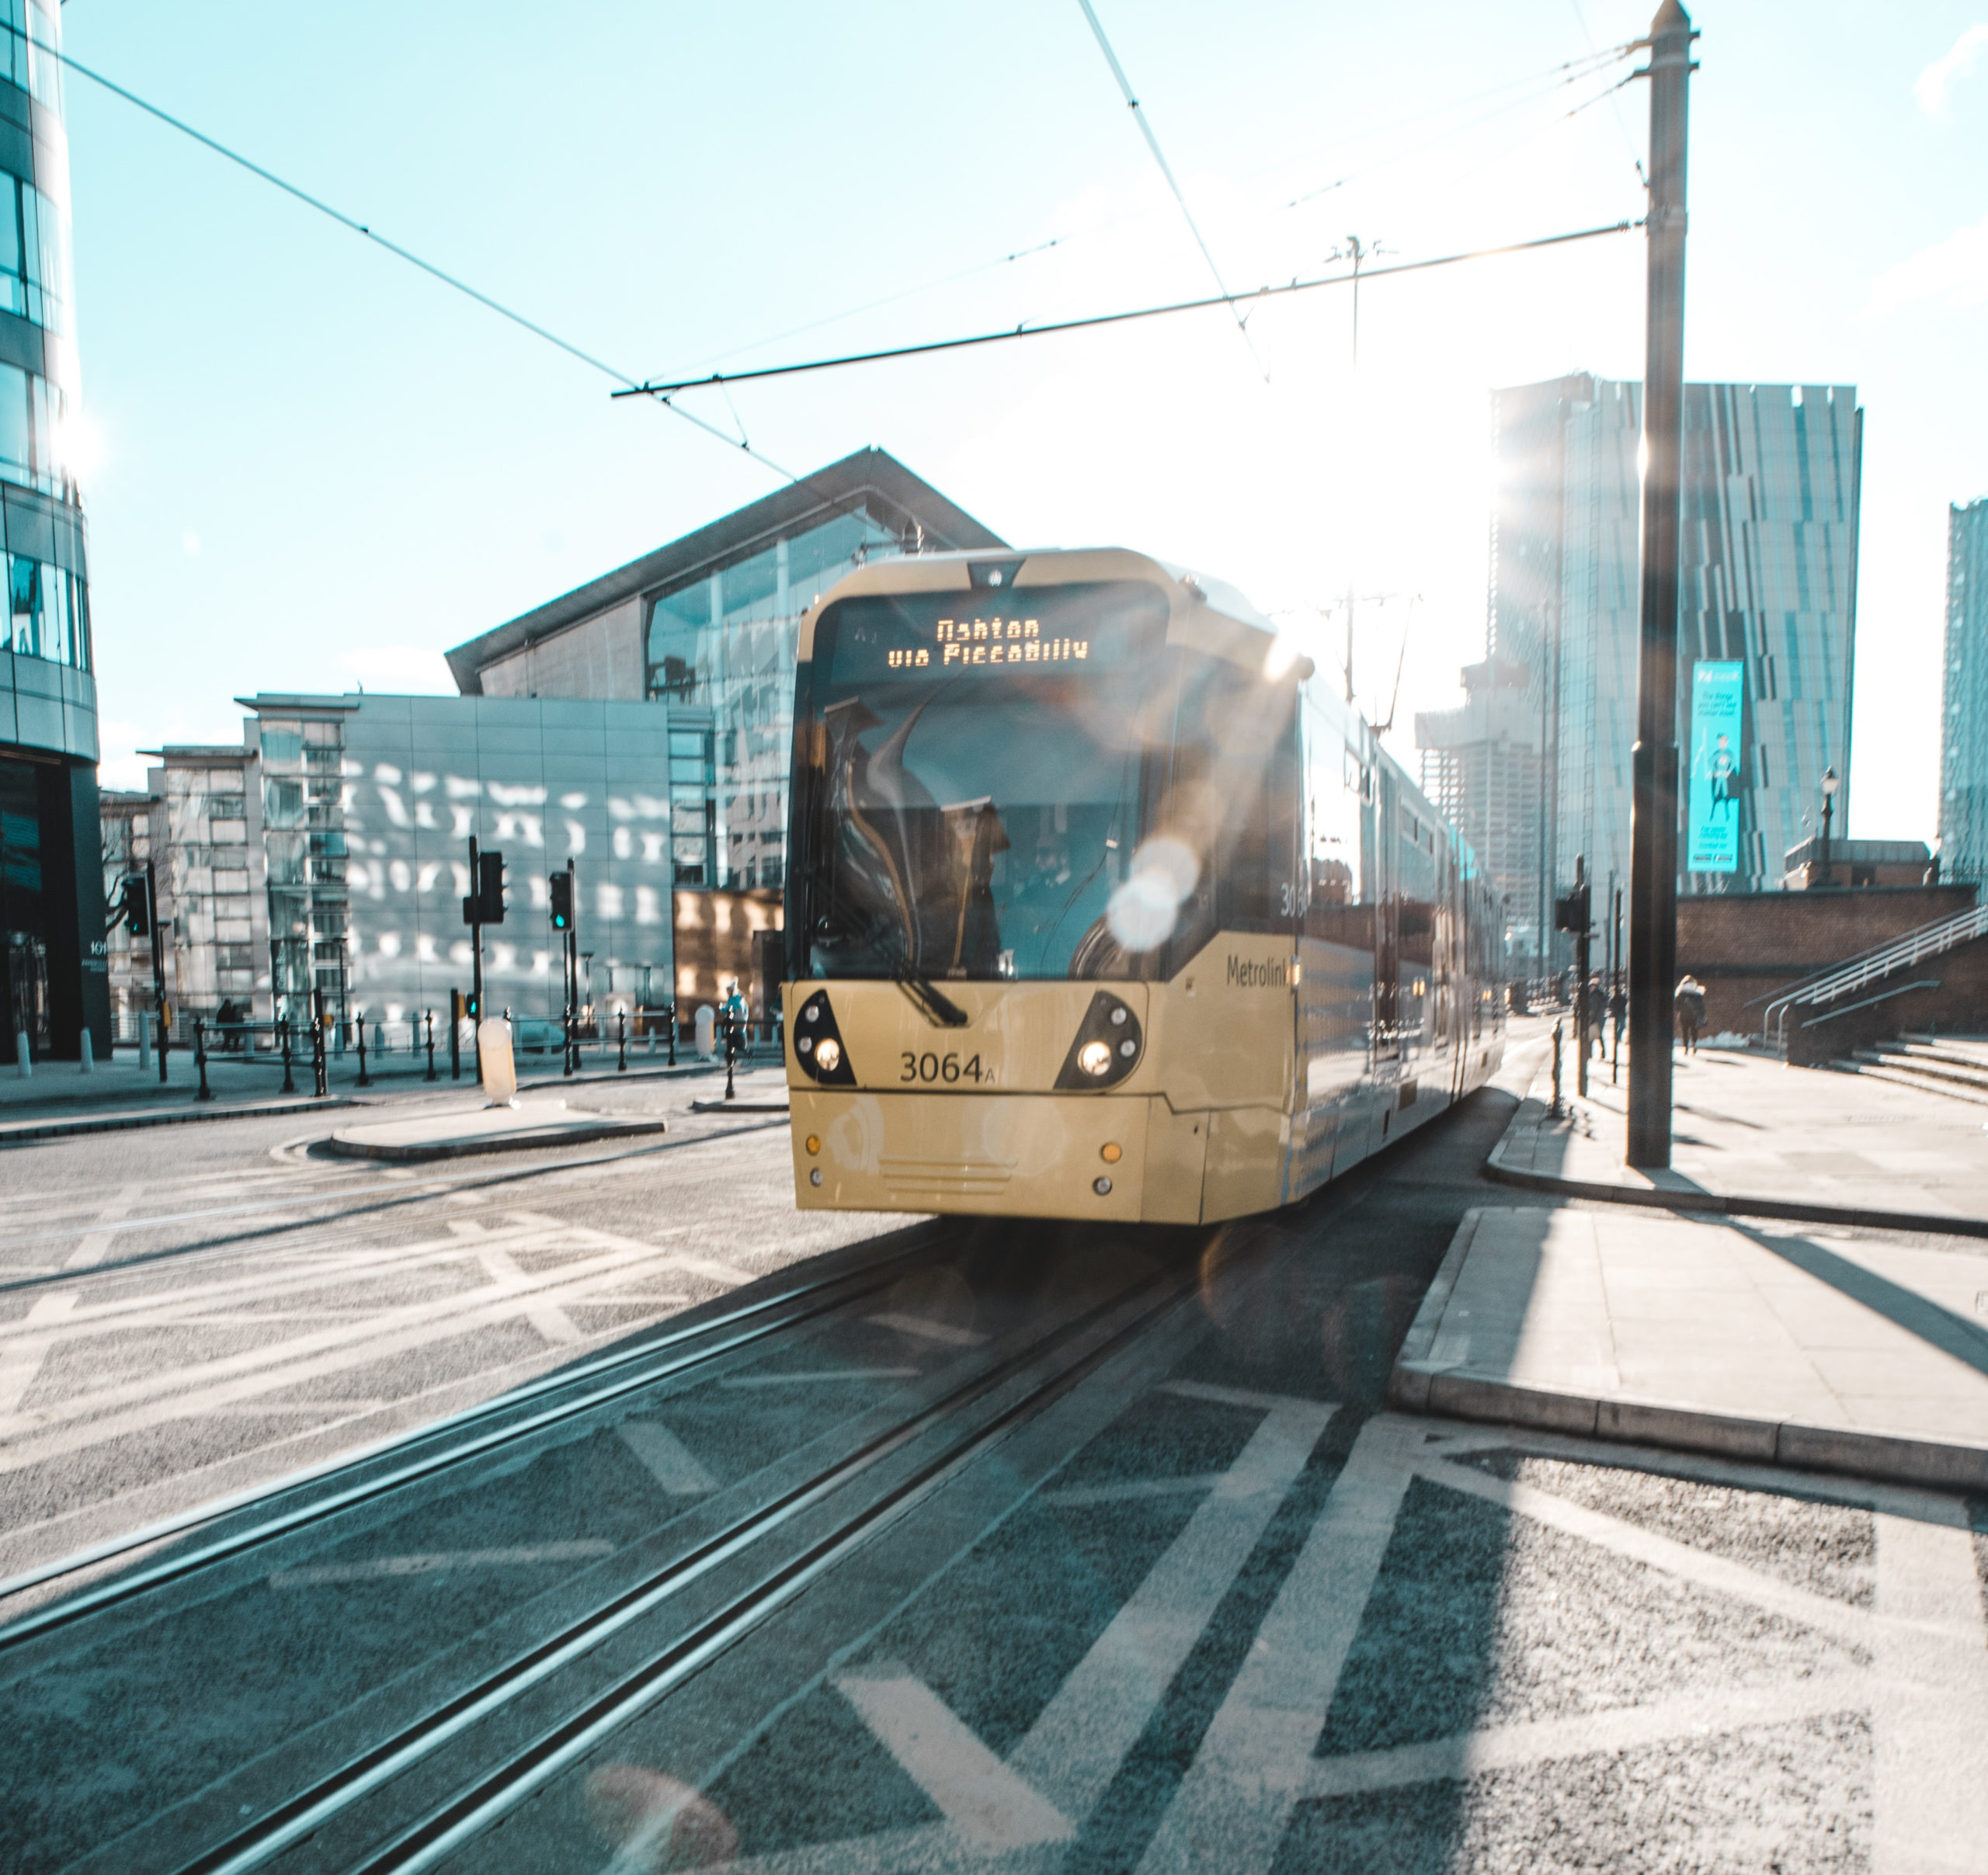 A yellow tram in Manchester, England